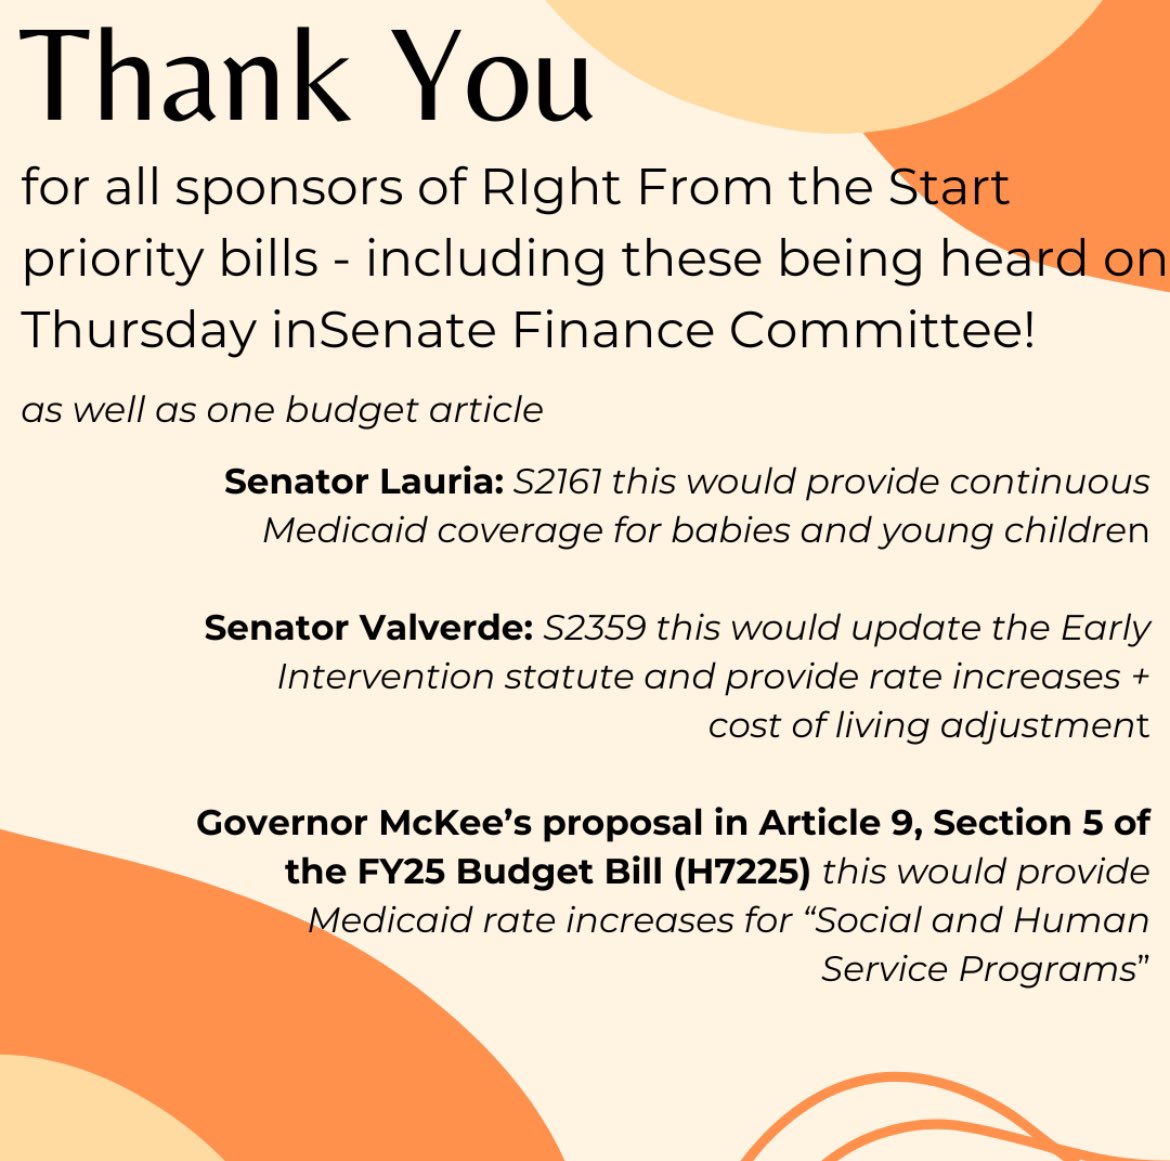 Thank you for all sponsors of RIght From the Start priority bills - including these 2 priority bills and 1 budget article being heard this Thursday! @bridget4ri @pam_lauria @GovDanMcKee @RIghtStartRI